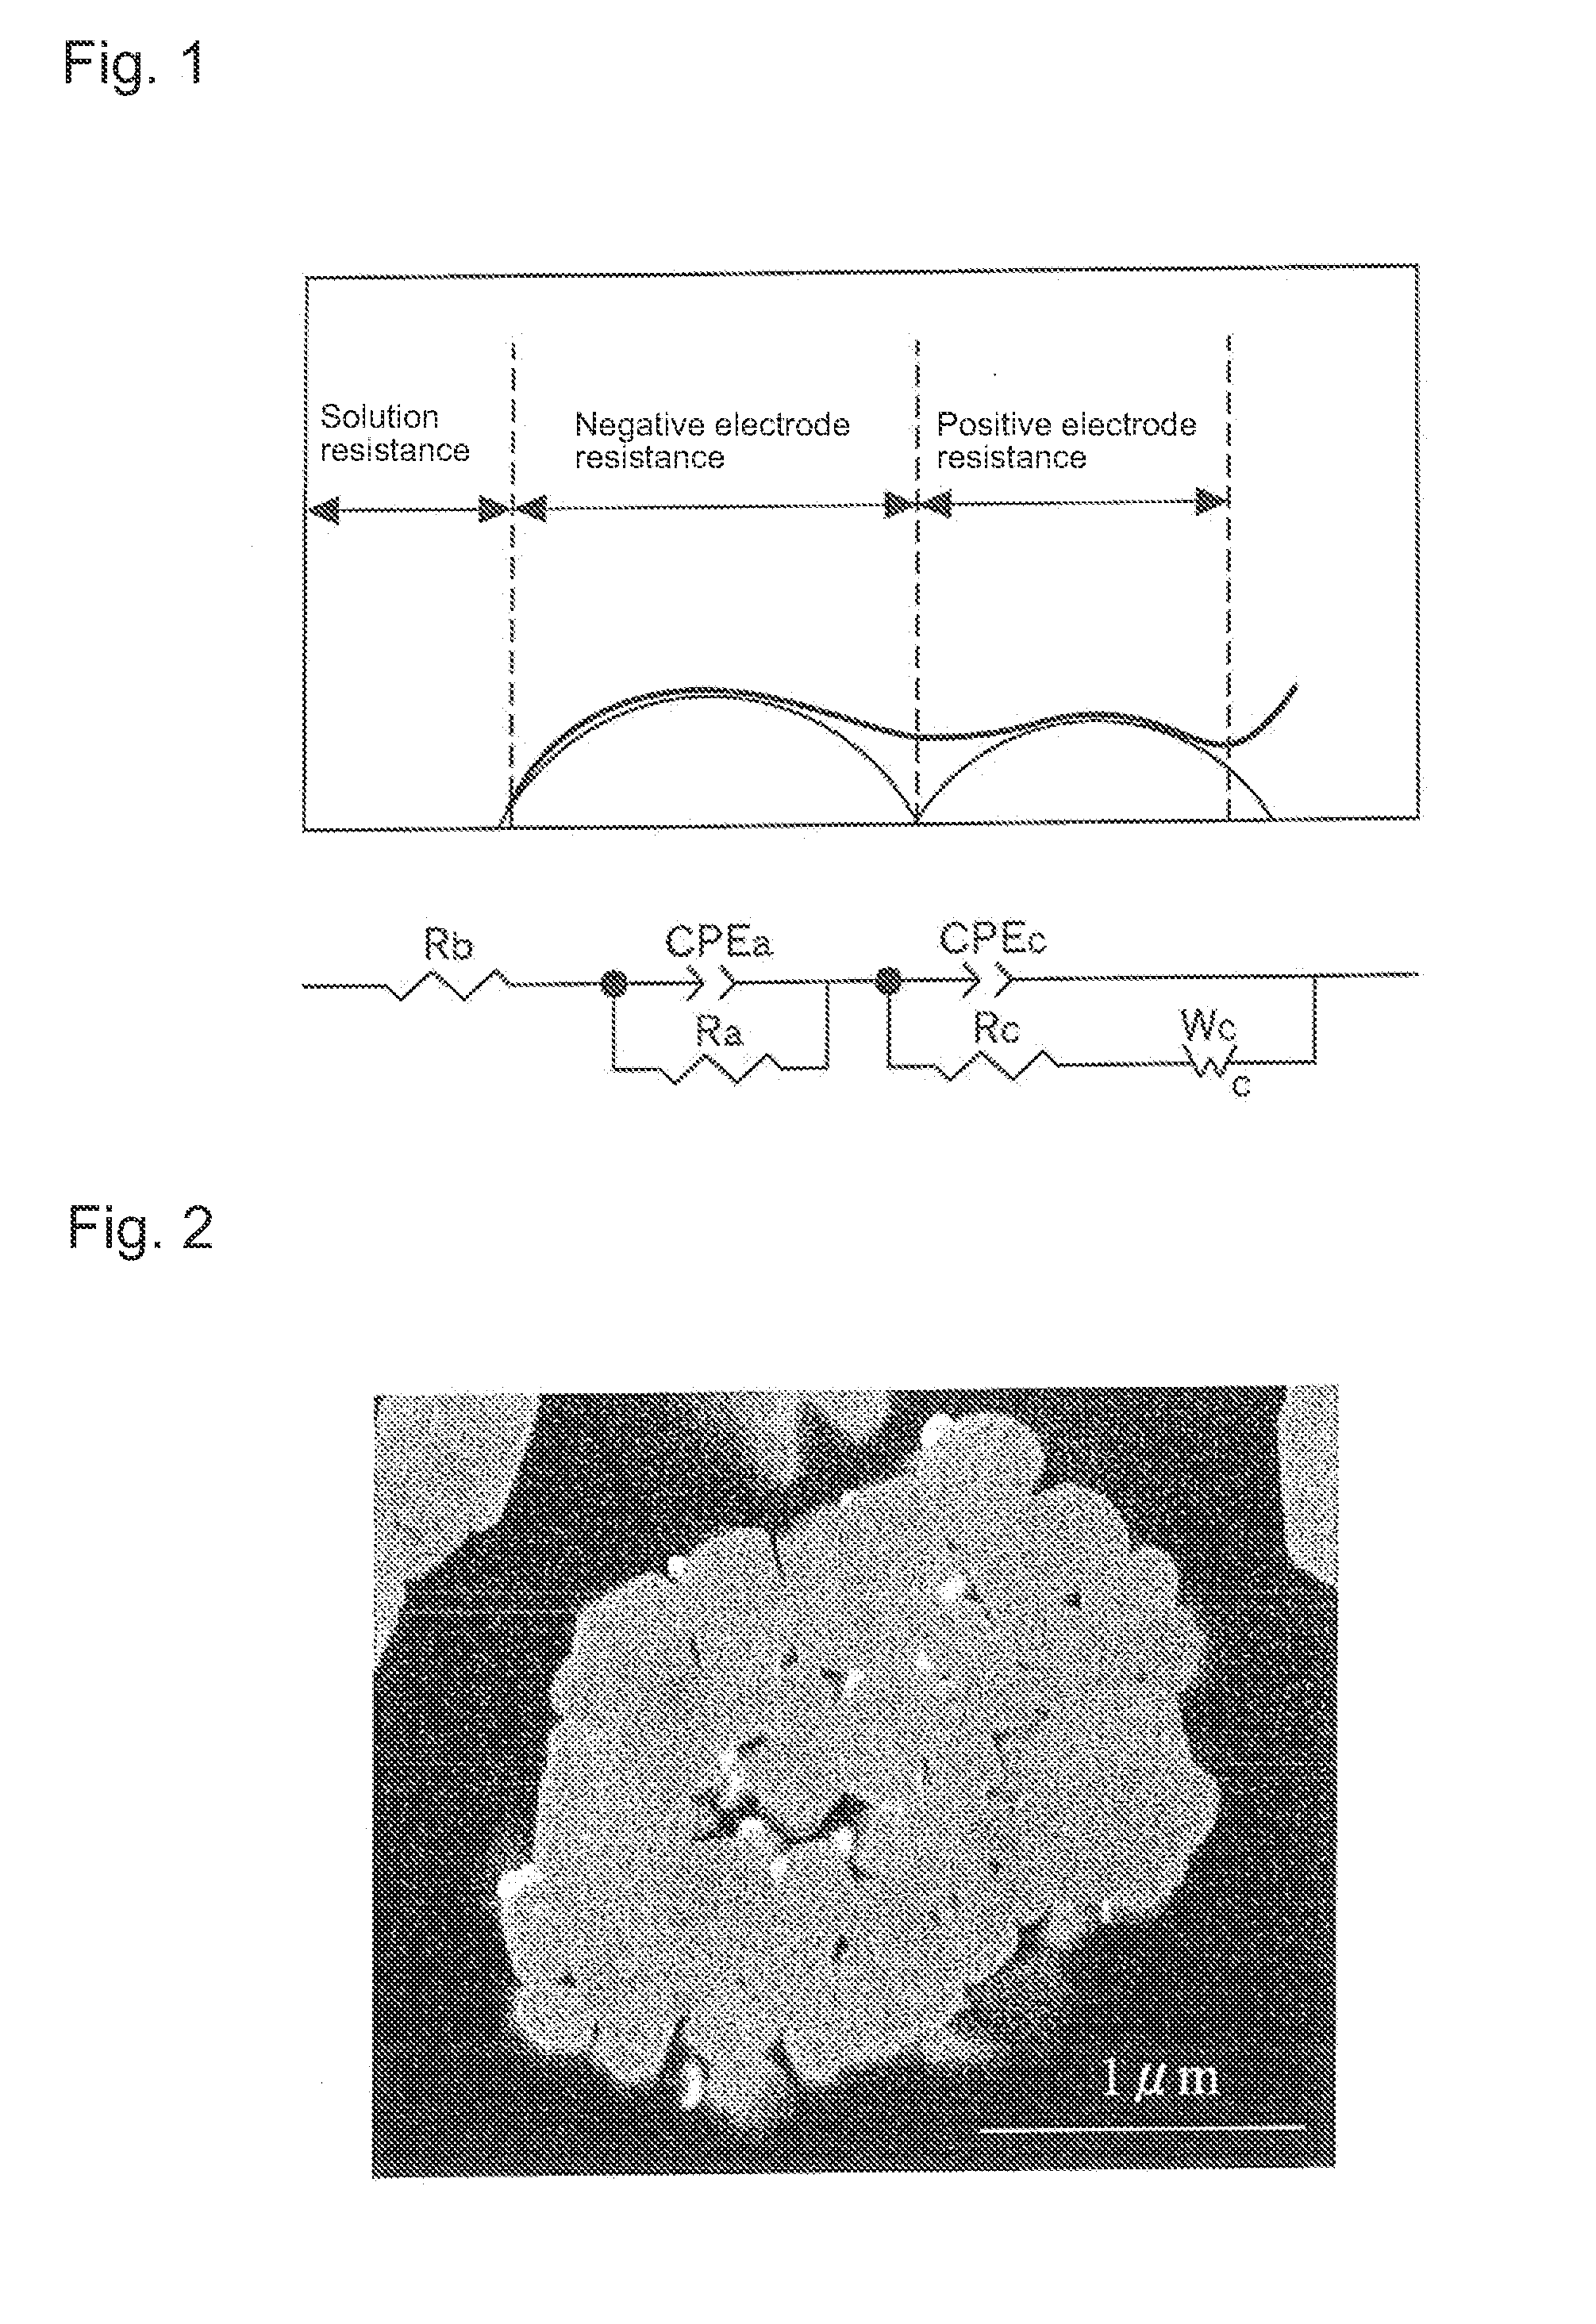 Positive electrode active material for nonaqueous electrolyte secondary batteries, method for manufacturing the same, and nonaqueous electrolyte secondary battery using said positive electrode active material